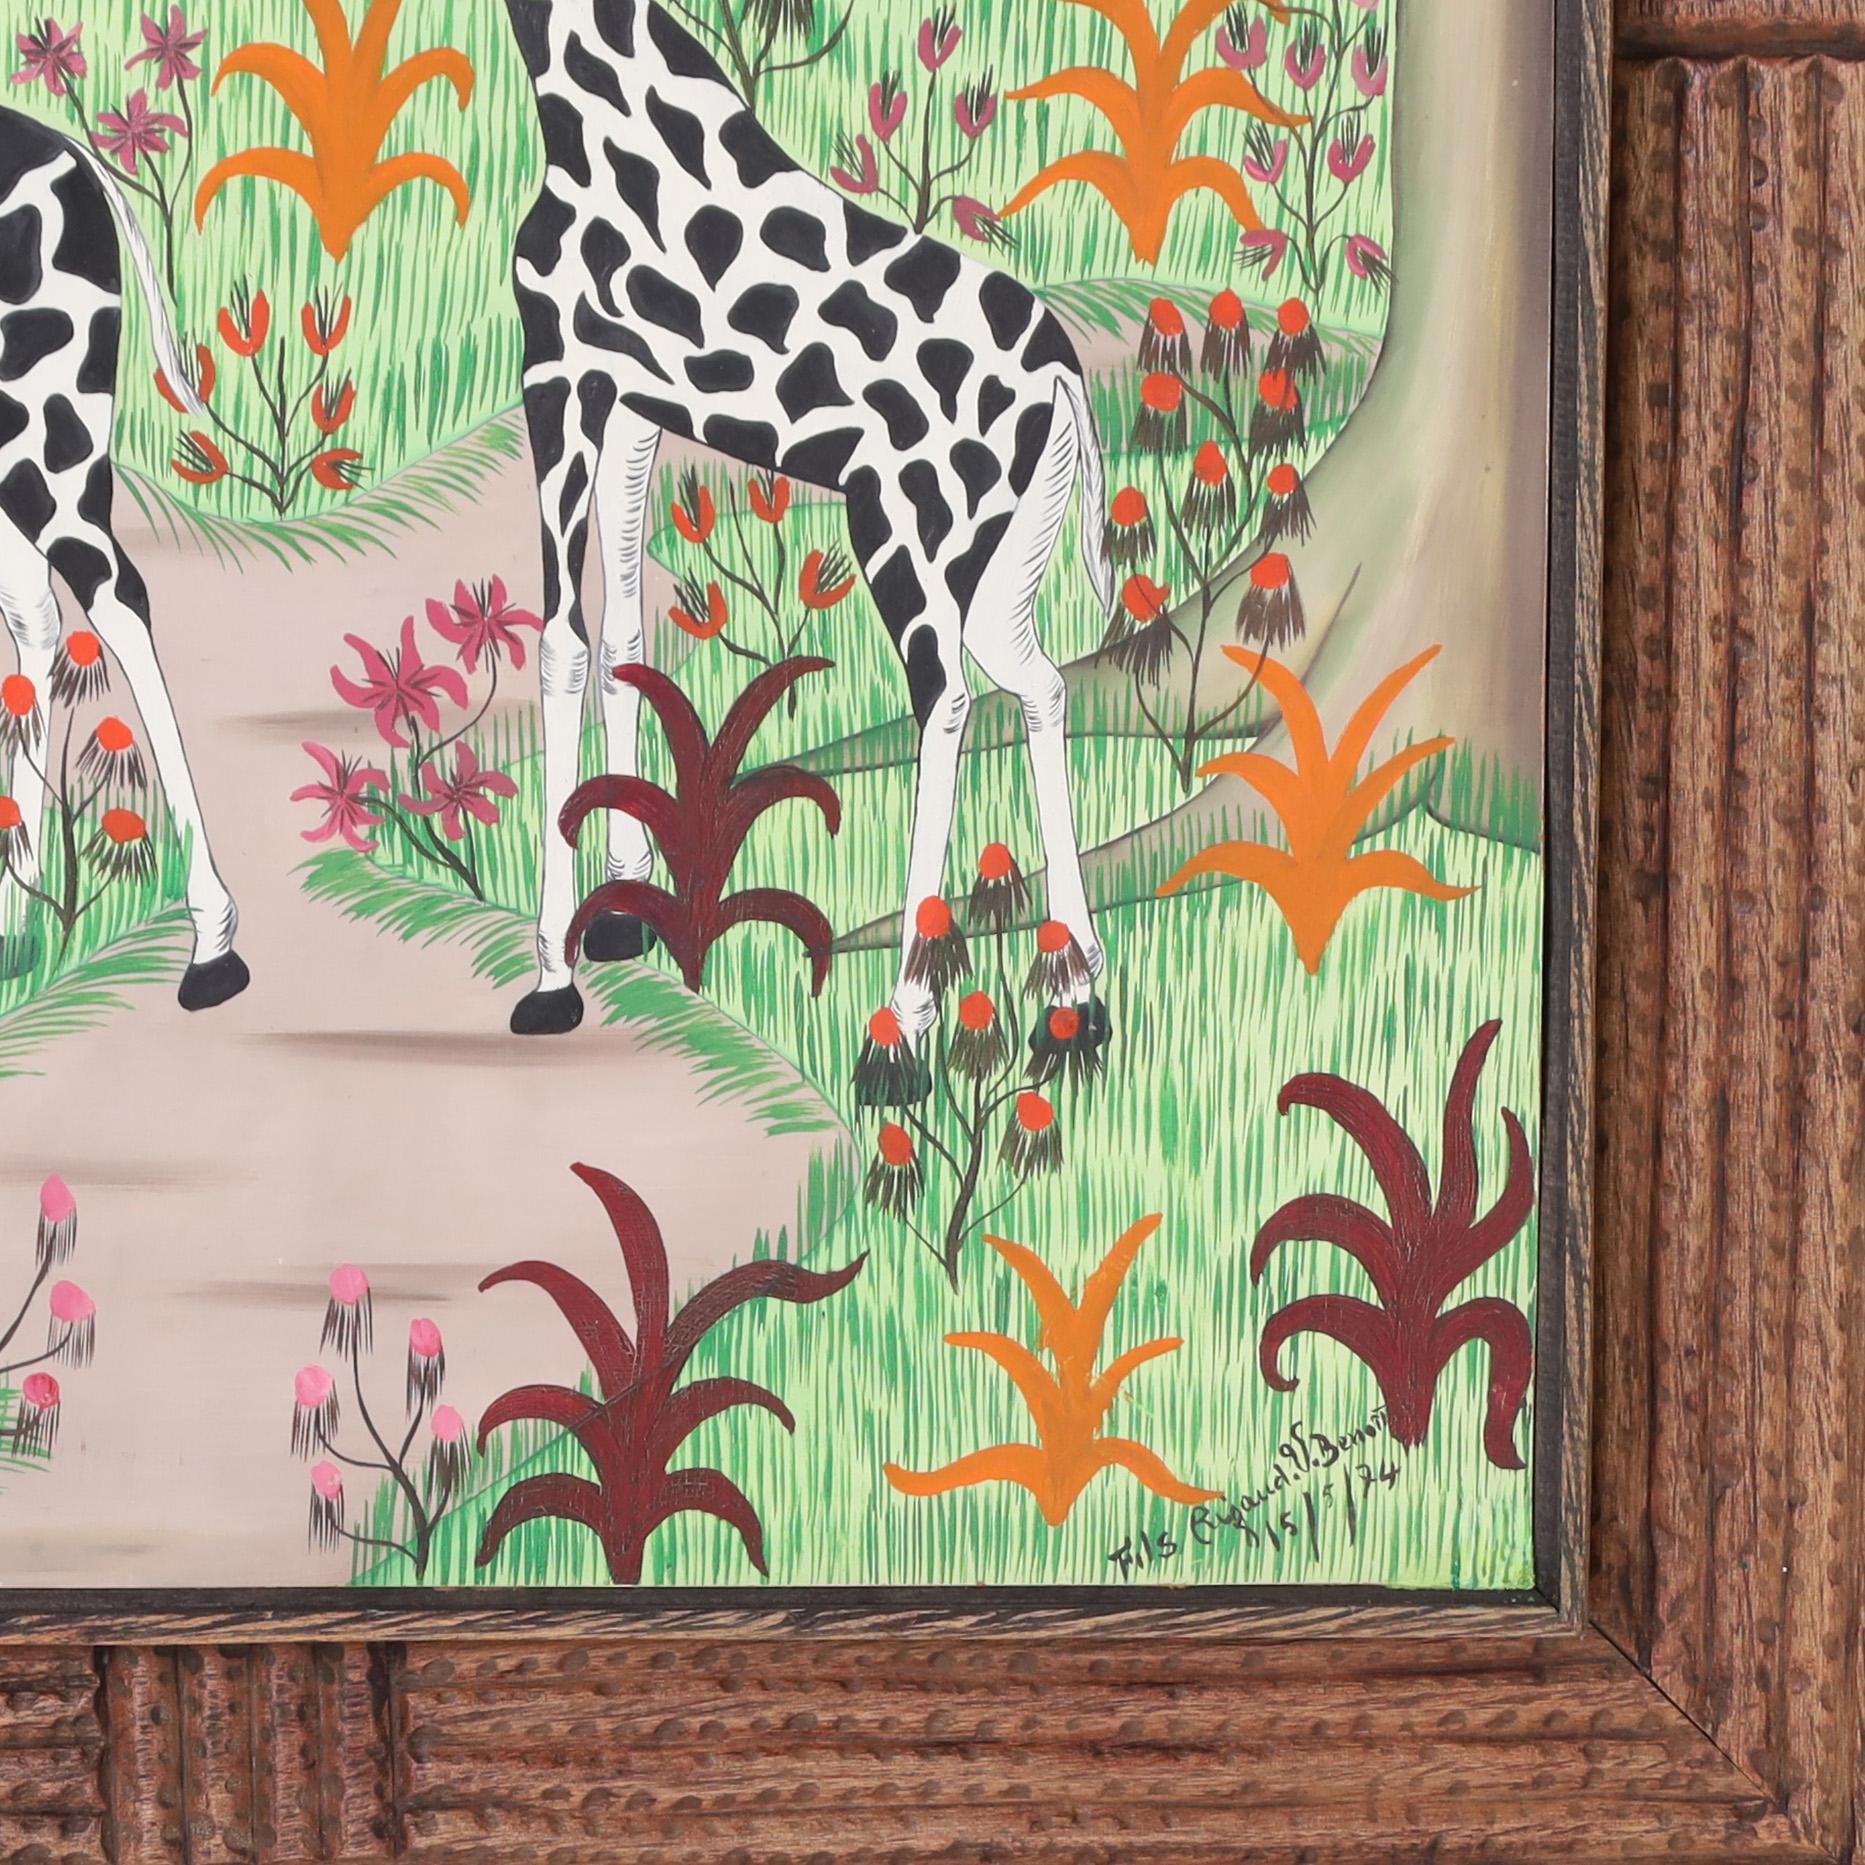 Hand-Painted Haitian Painting of Giraffes For Sale